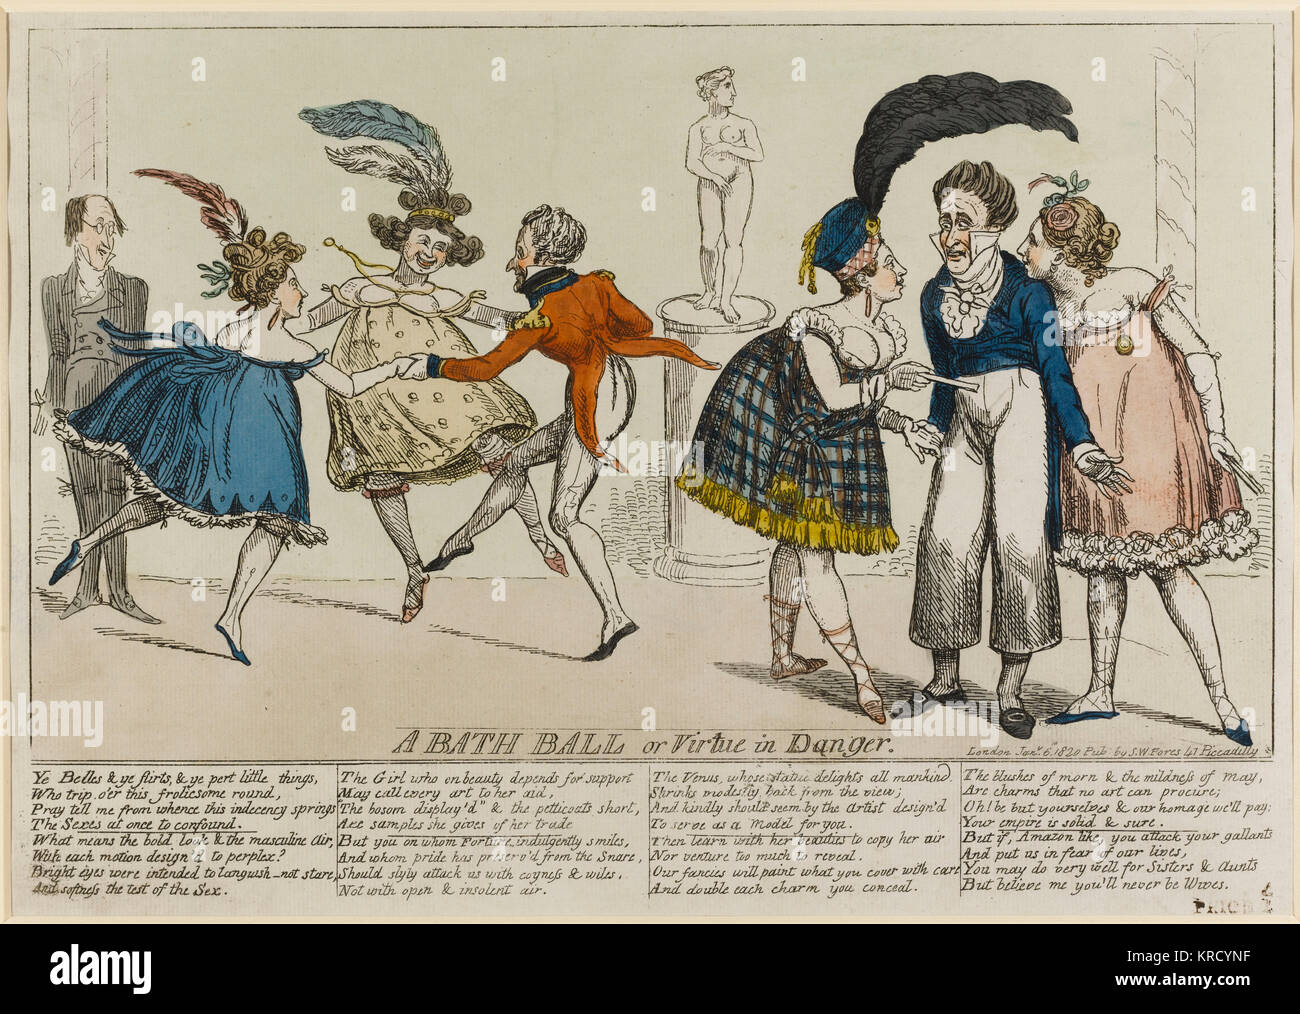 Satirical cartoon, A Bath Ball or Virtue in Danger.  A ball scene - an officer dances energetically with two ladies while a dandy, confronted by two flirting ladies, appears too shy to dance.  The accompanying verses end: 'But if, Amazon like, you attack your gallants And put us in fear of our lives, You may do very well for Sisters &amp; Aunts But believe me you'll never be Wives.'     Date: 1820 Stock Photo